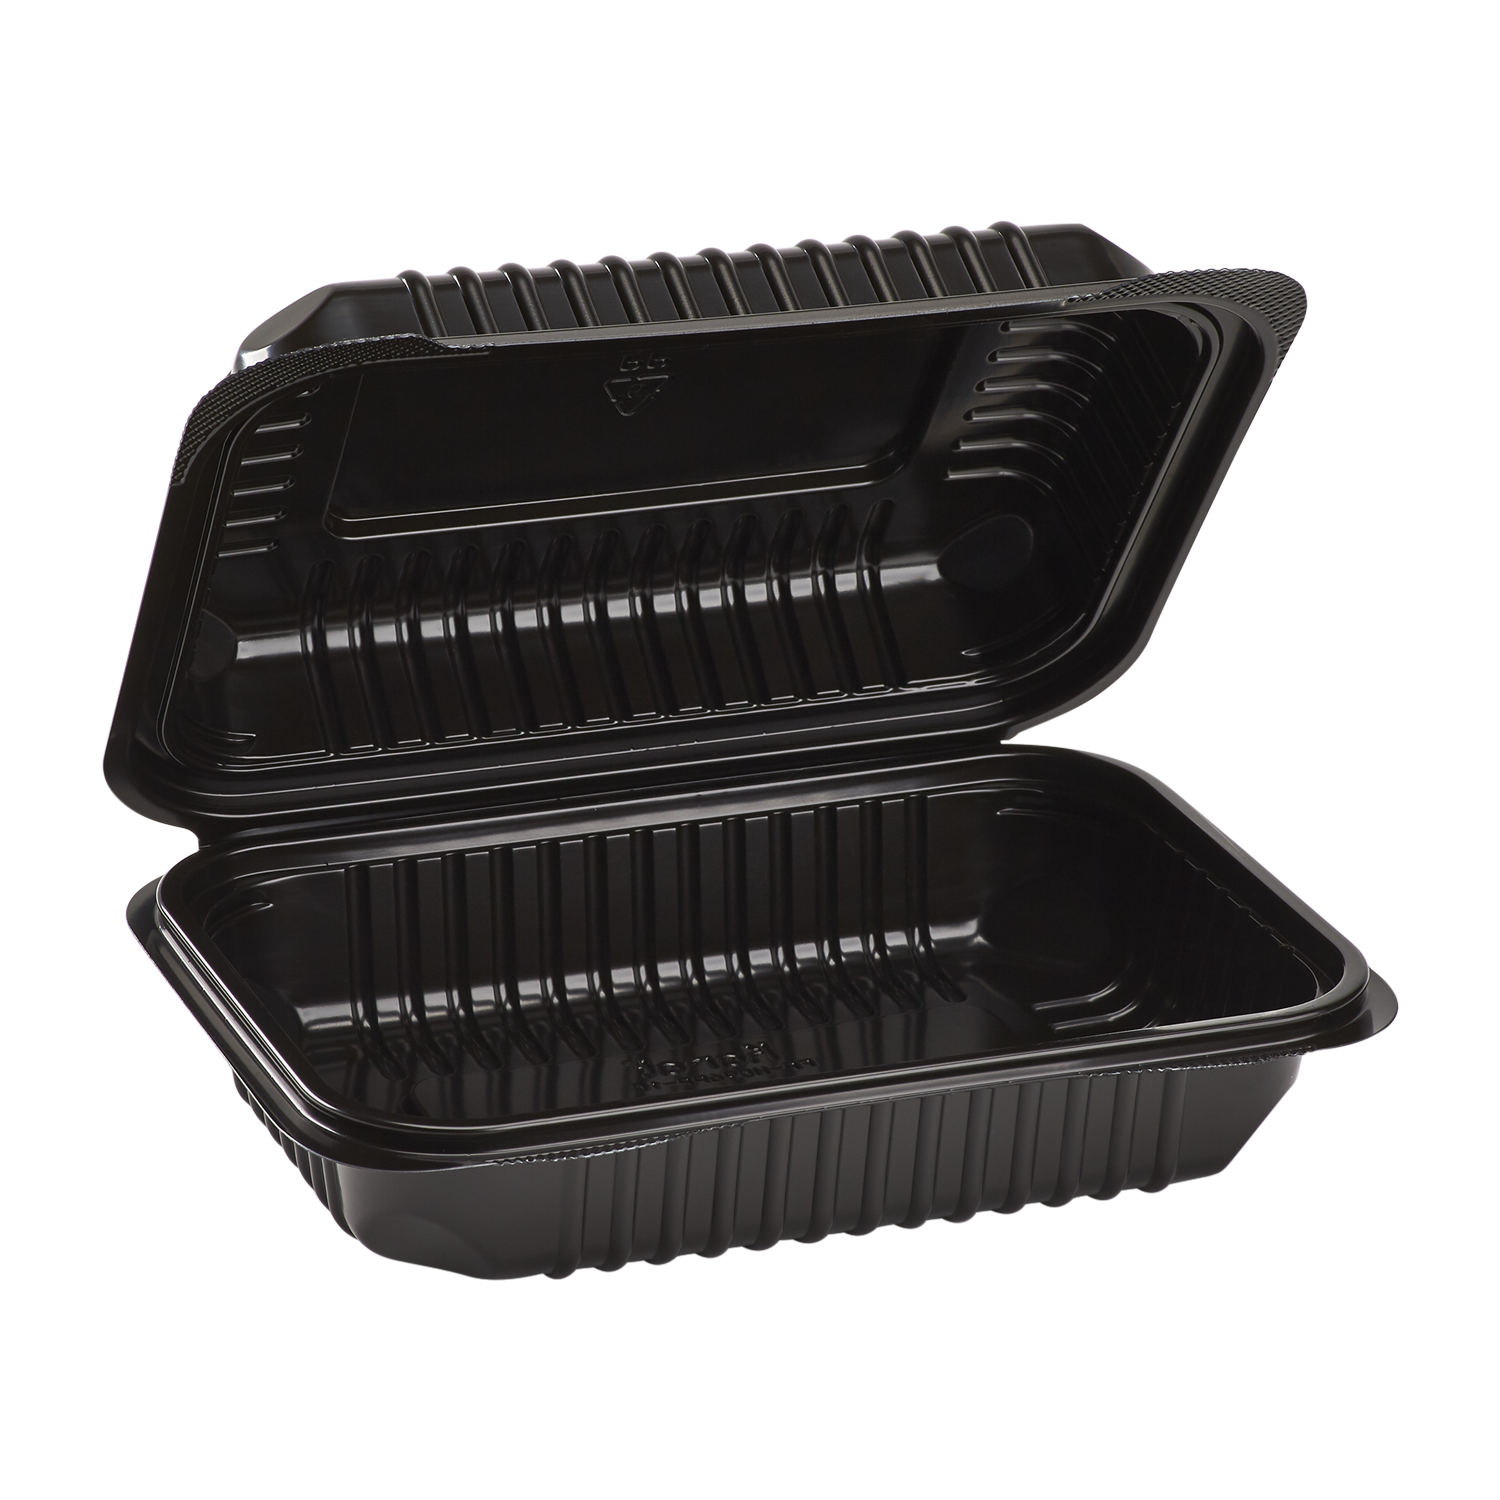 Black Half Clamshell Food Containers - 9x6 Hinged Take Out Boxes